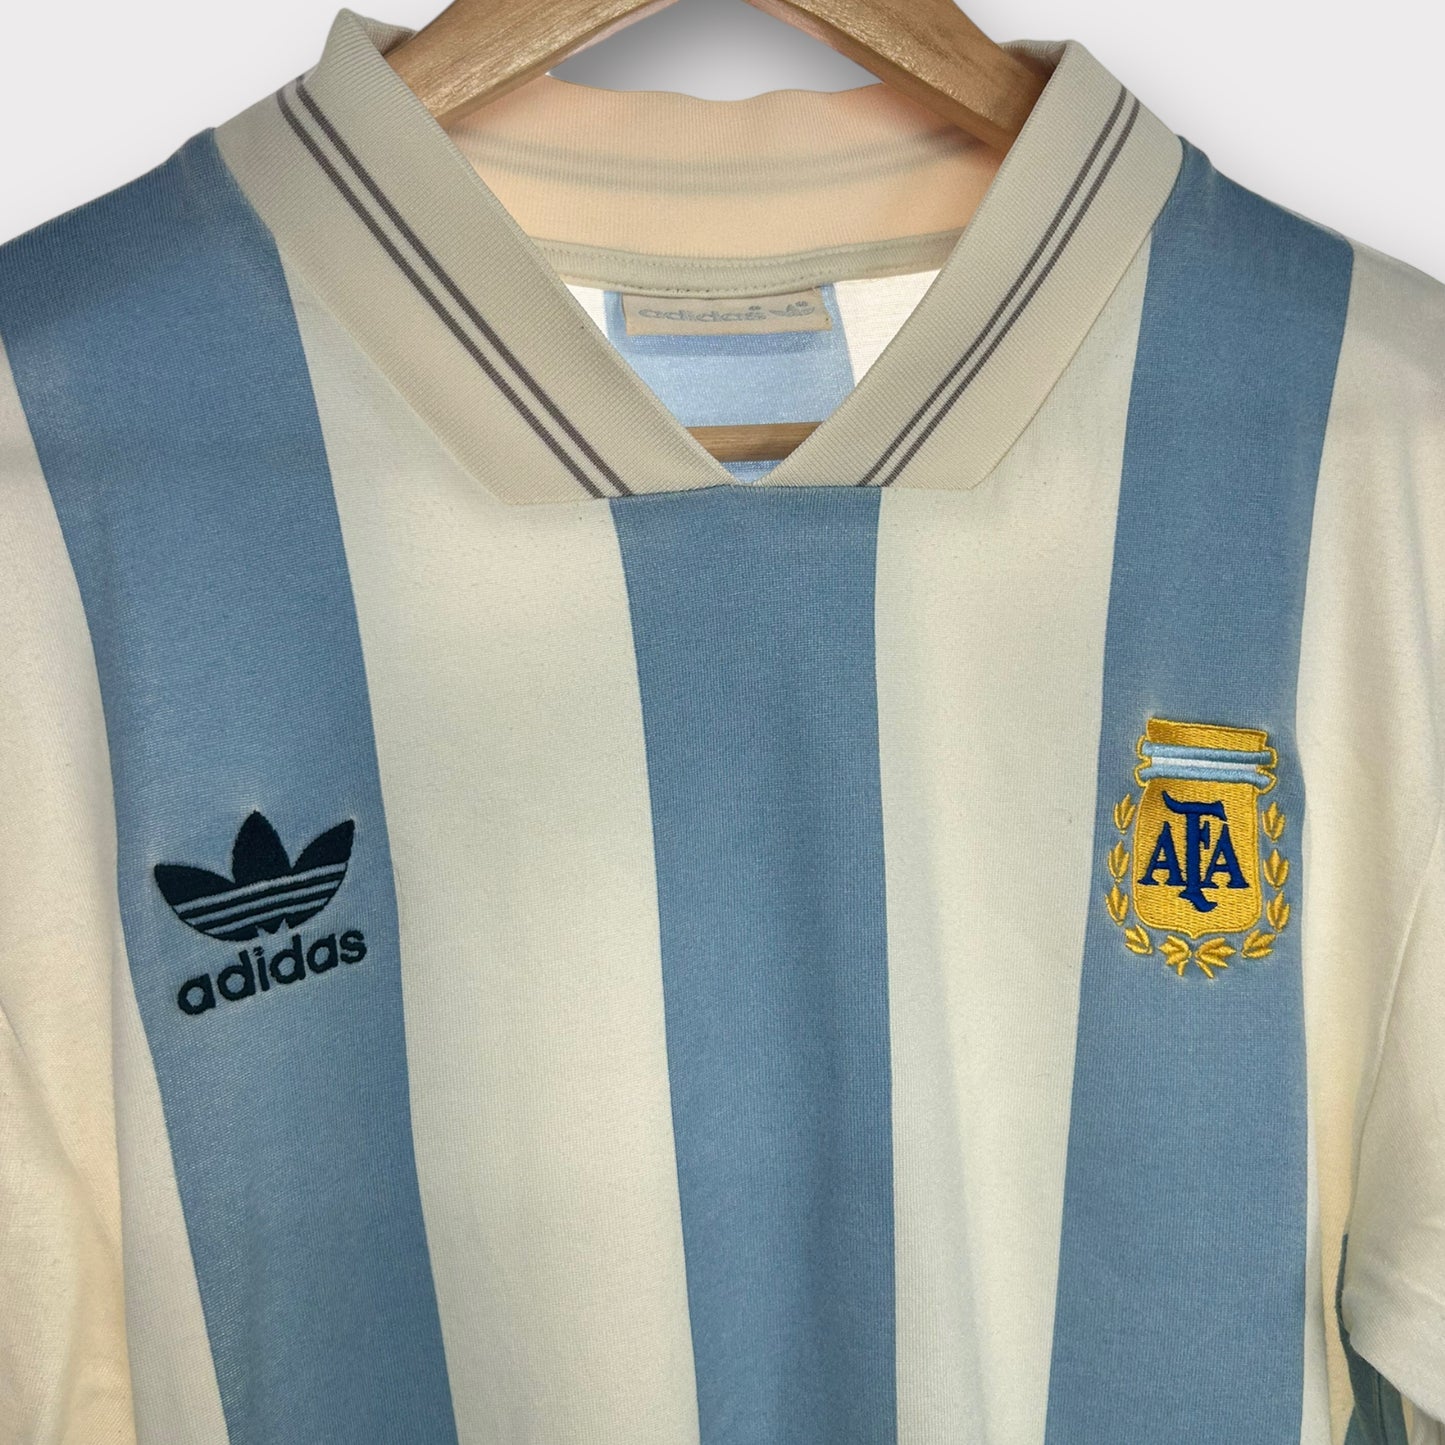 Argentina 1992/93 Adidas Re-Issue - #10 (Small)